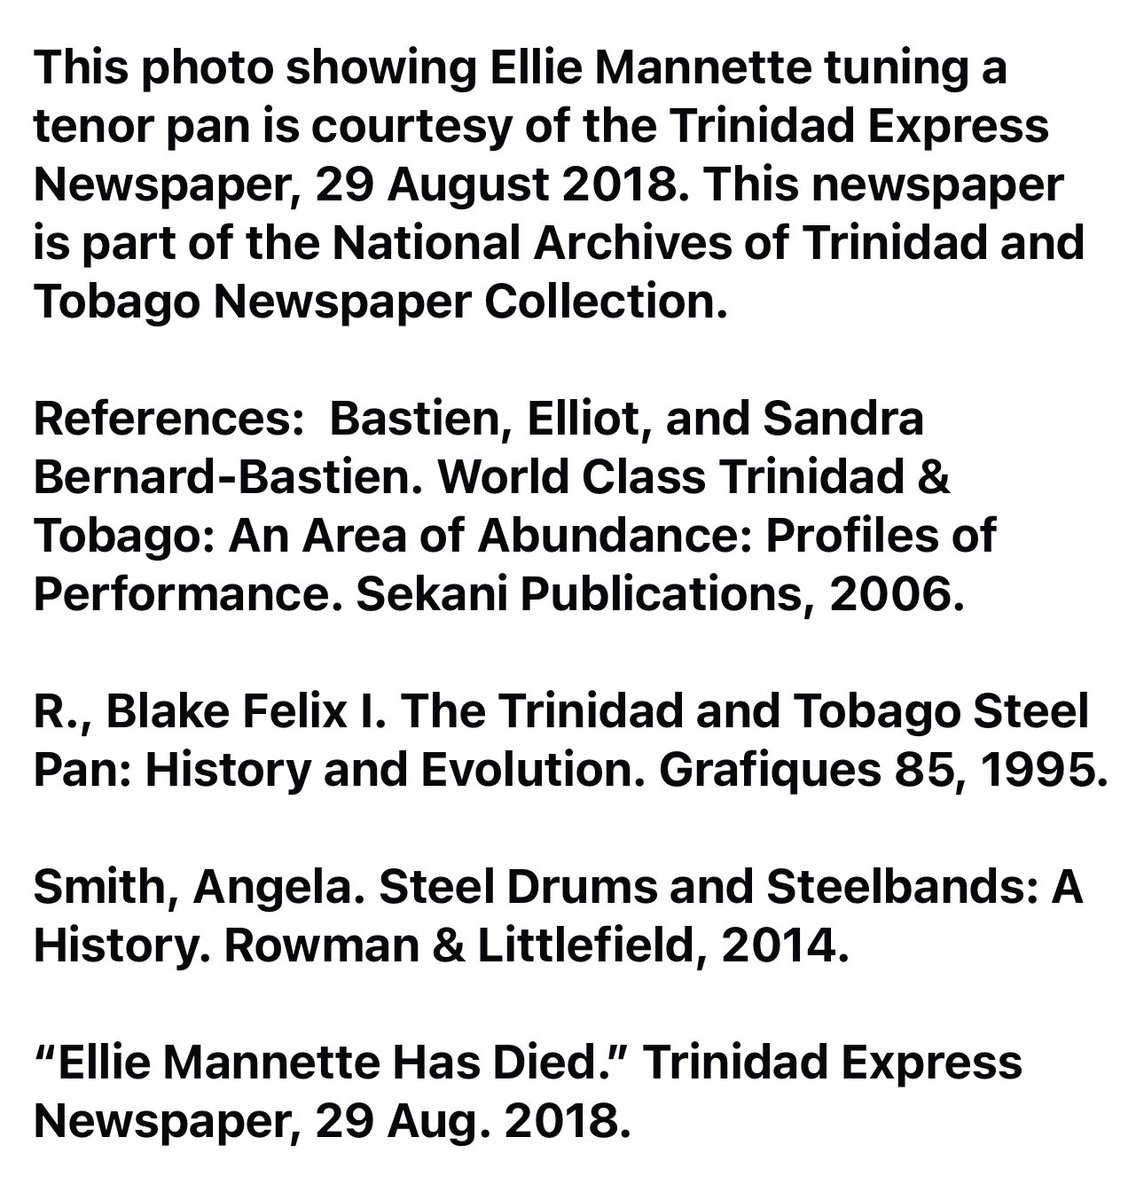 Today, we celebrate the legendary steelpan pioneer Elliot “Ellie” Mannette, who is known as the co-inventor of the steelpan! 
#nationalarchivestt #nationalarchives #knowyourhistory #trinidadandtobago #steelpanhistory #steelbands #invadersorchestra #caribbeanhistory #elliemannette